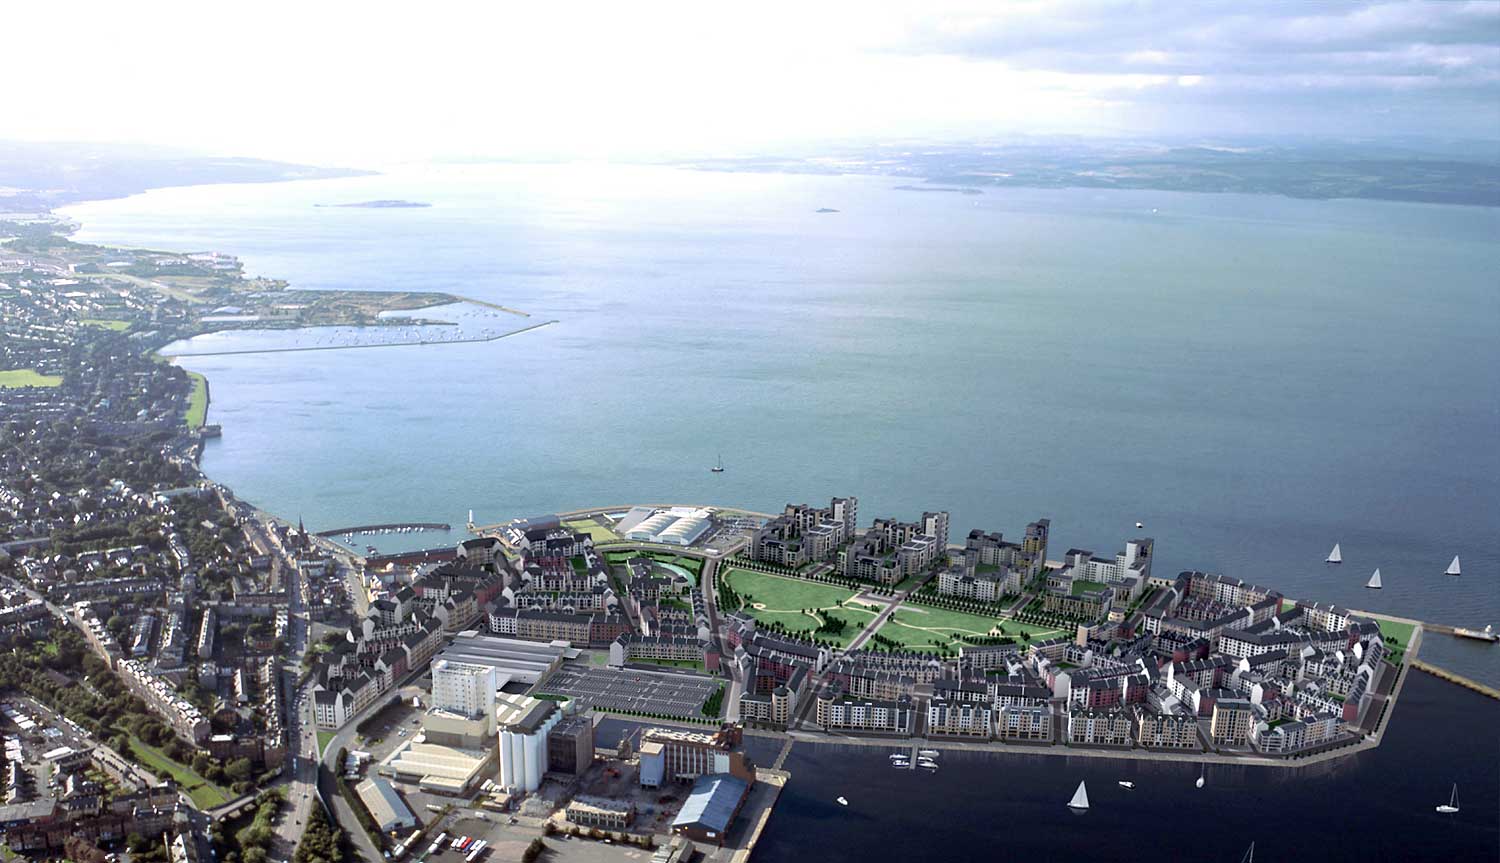 Edinburgh Forthside  -  Aerial View  -  Leith Western Harbour in the foreground.  The Firth of Forth in the background.